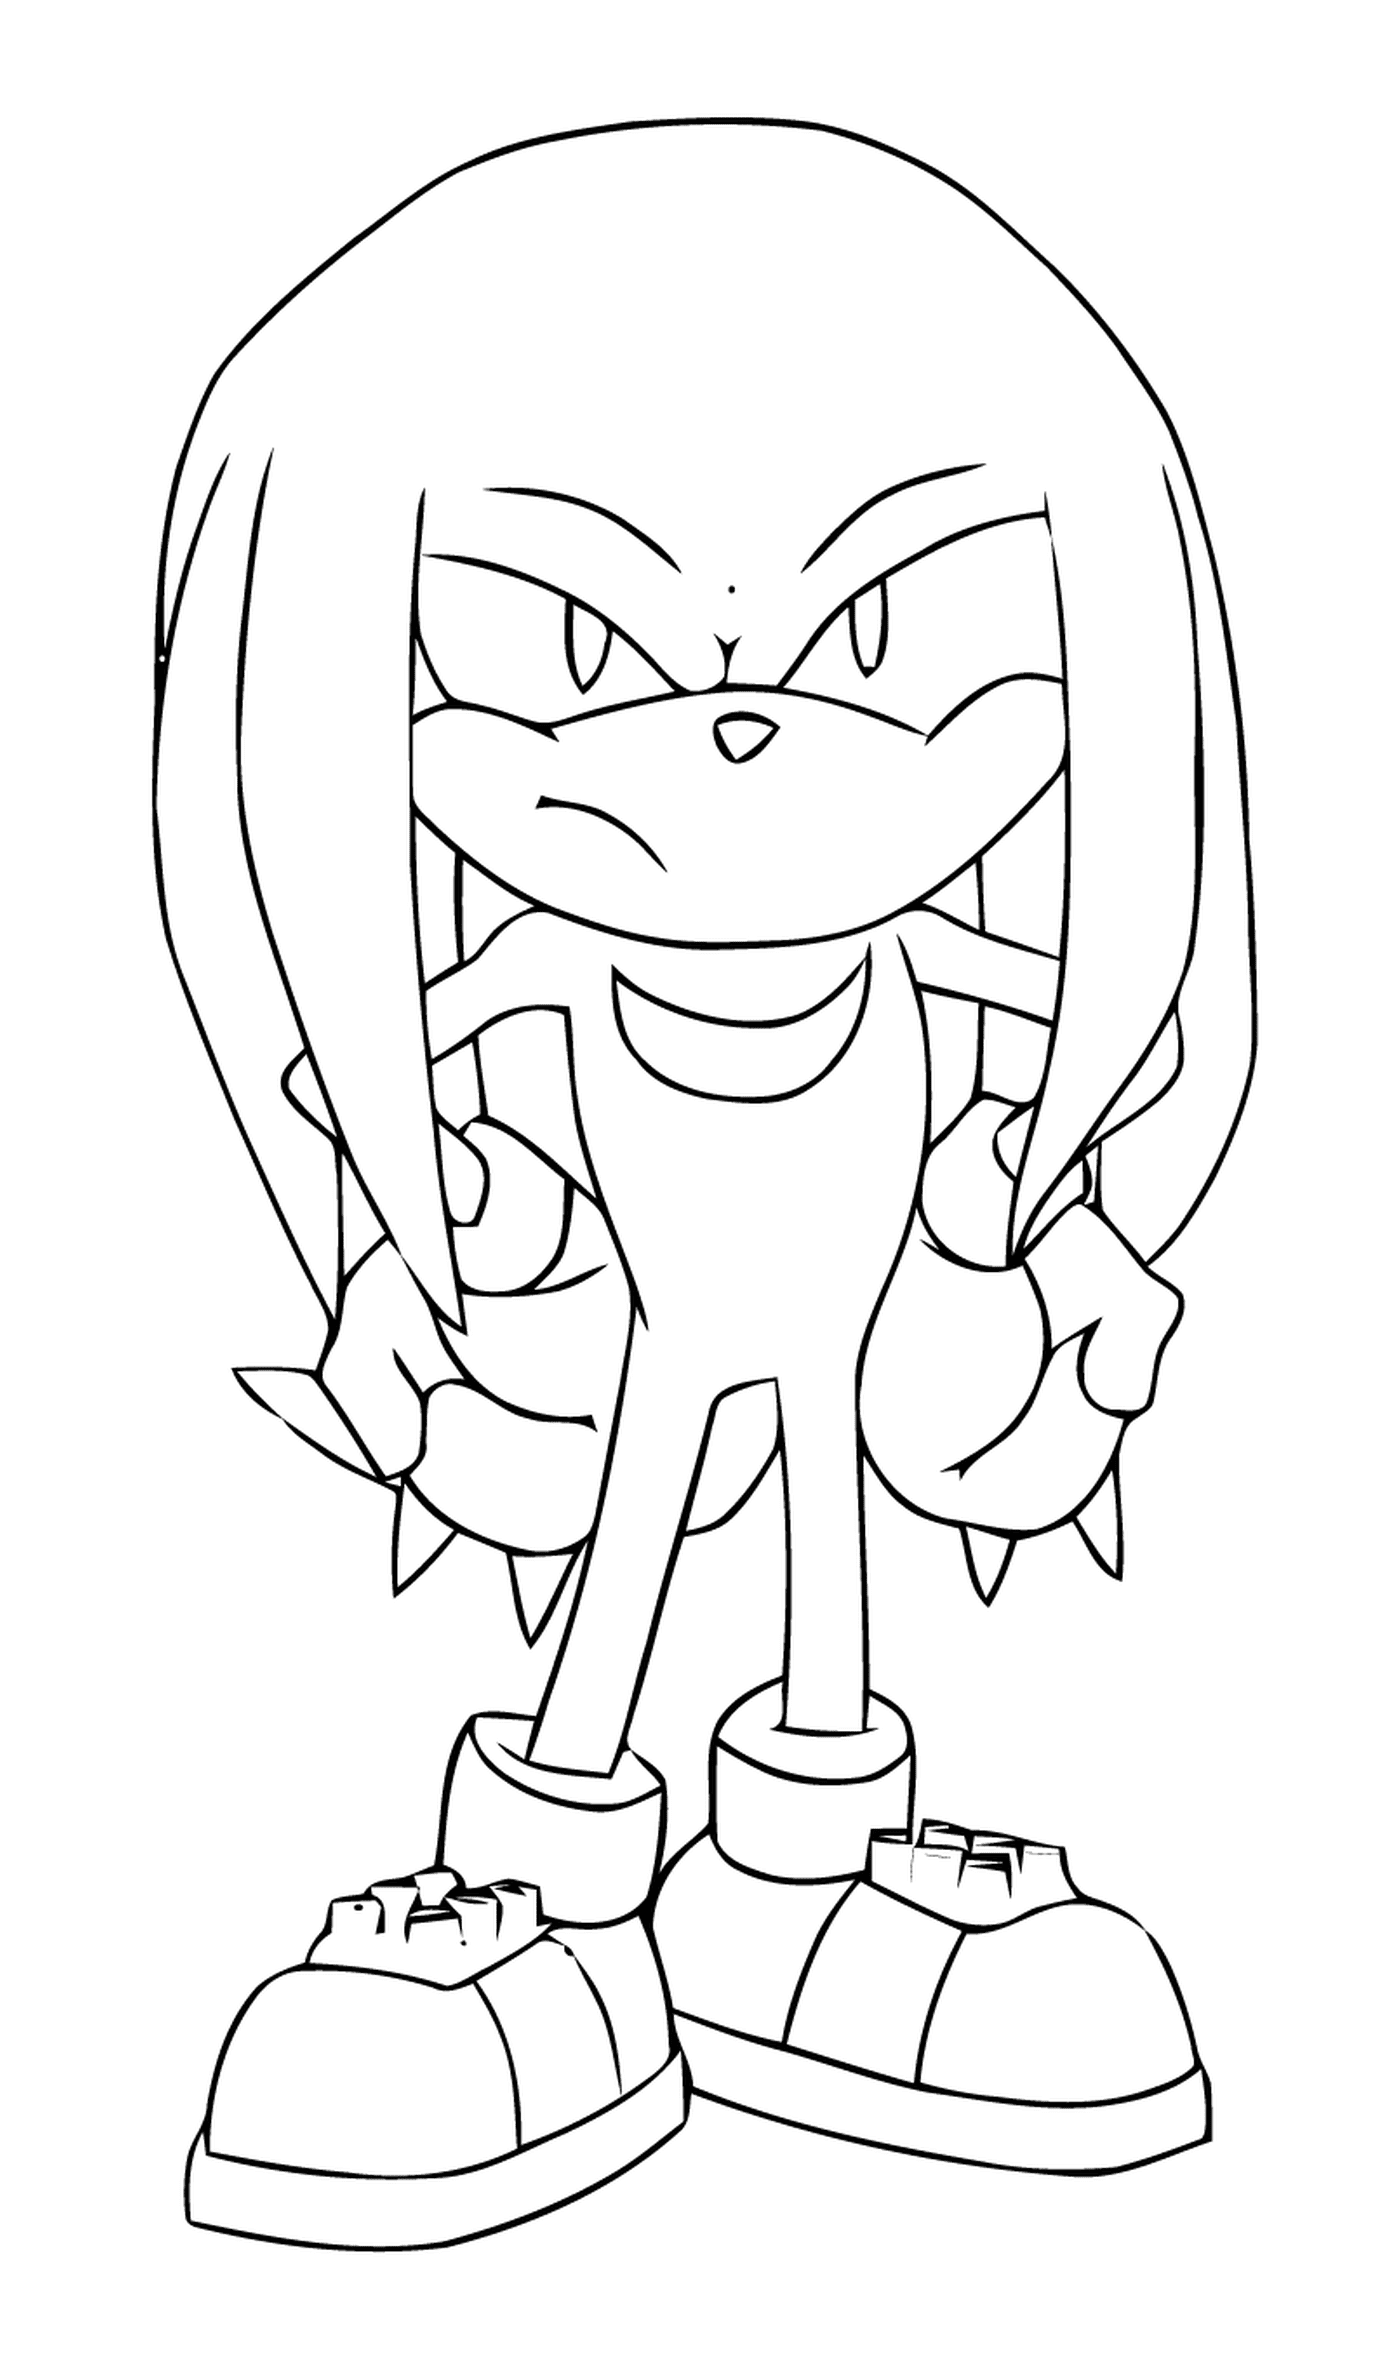  Sonic with a specific expression 